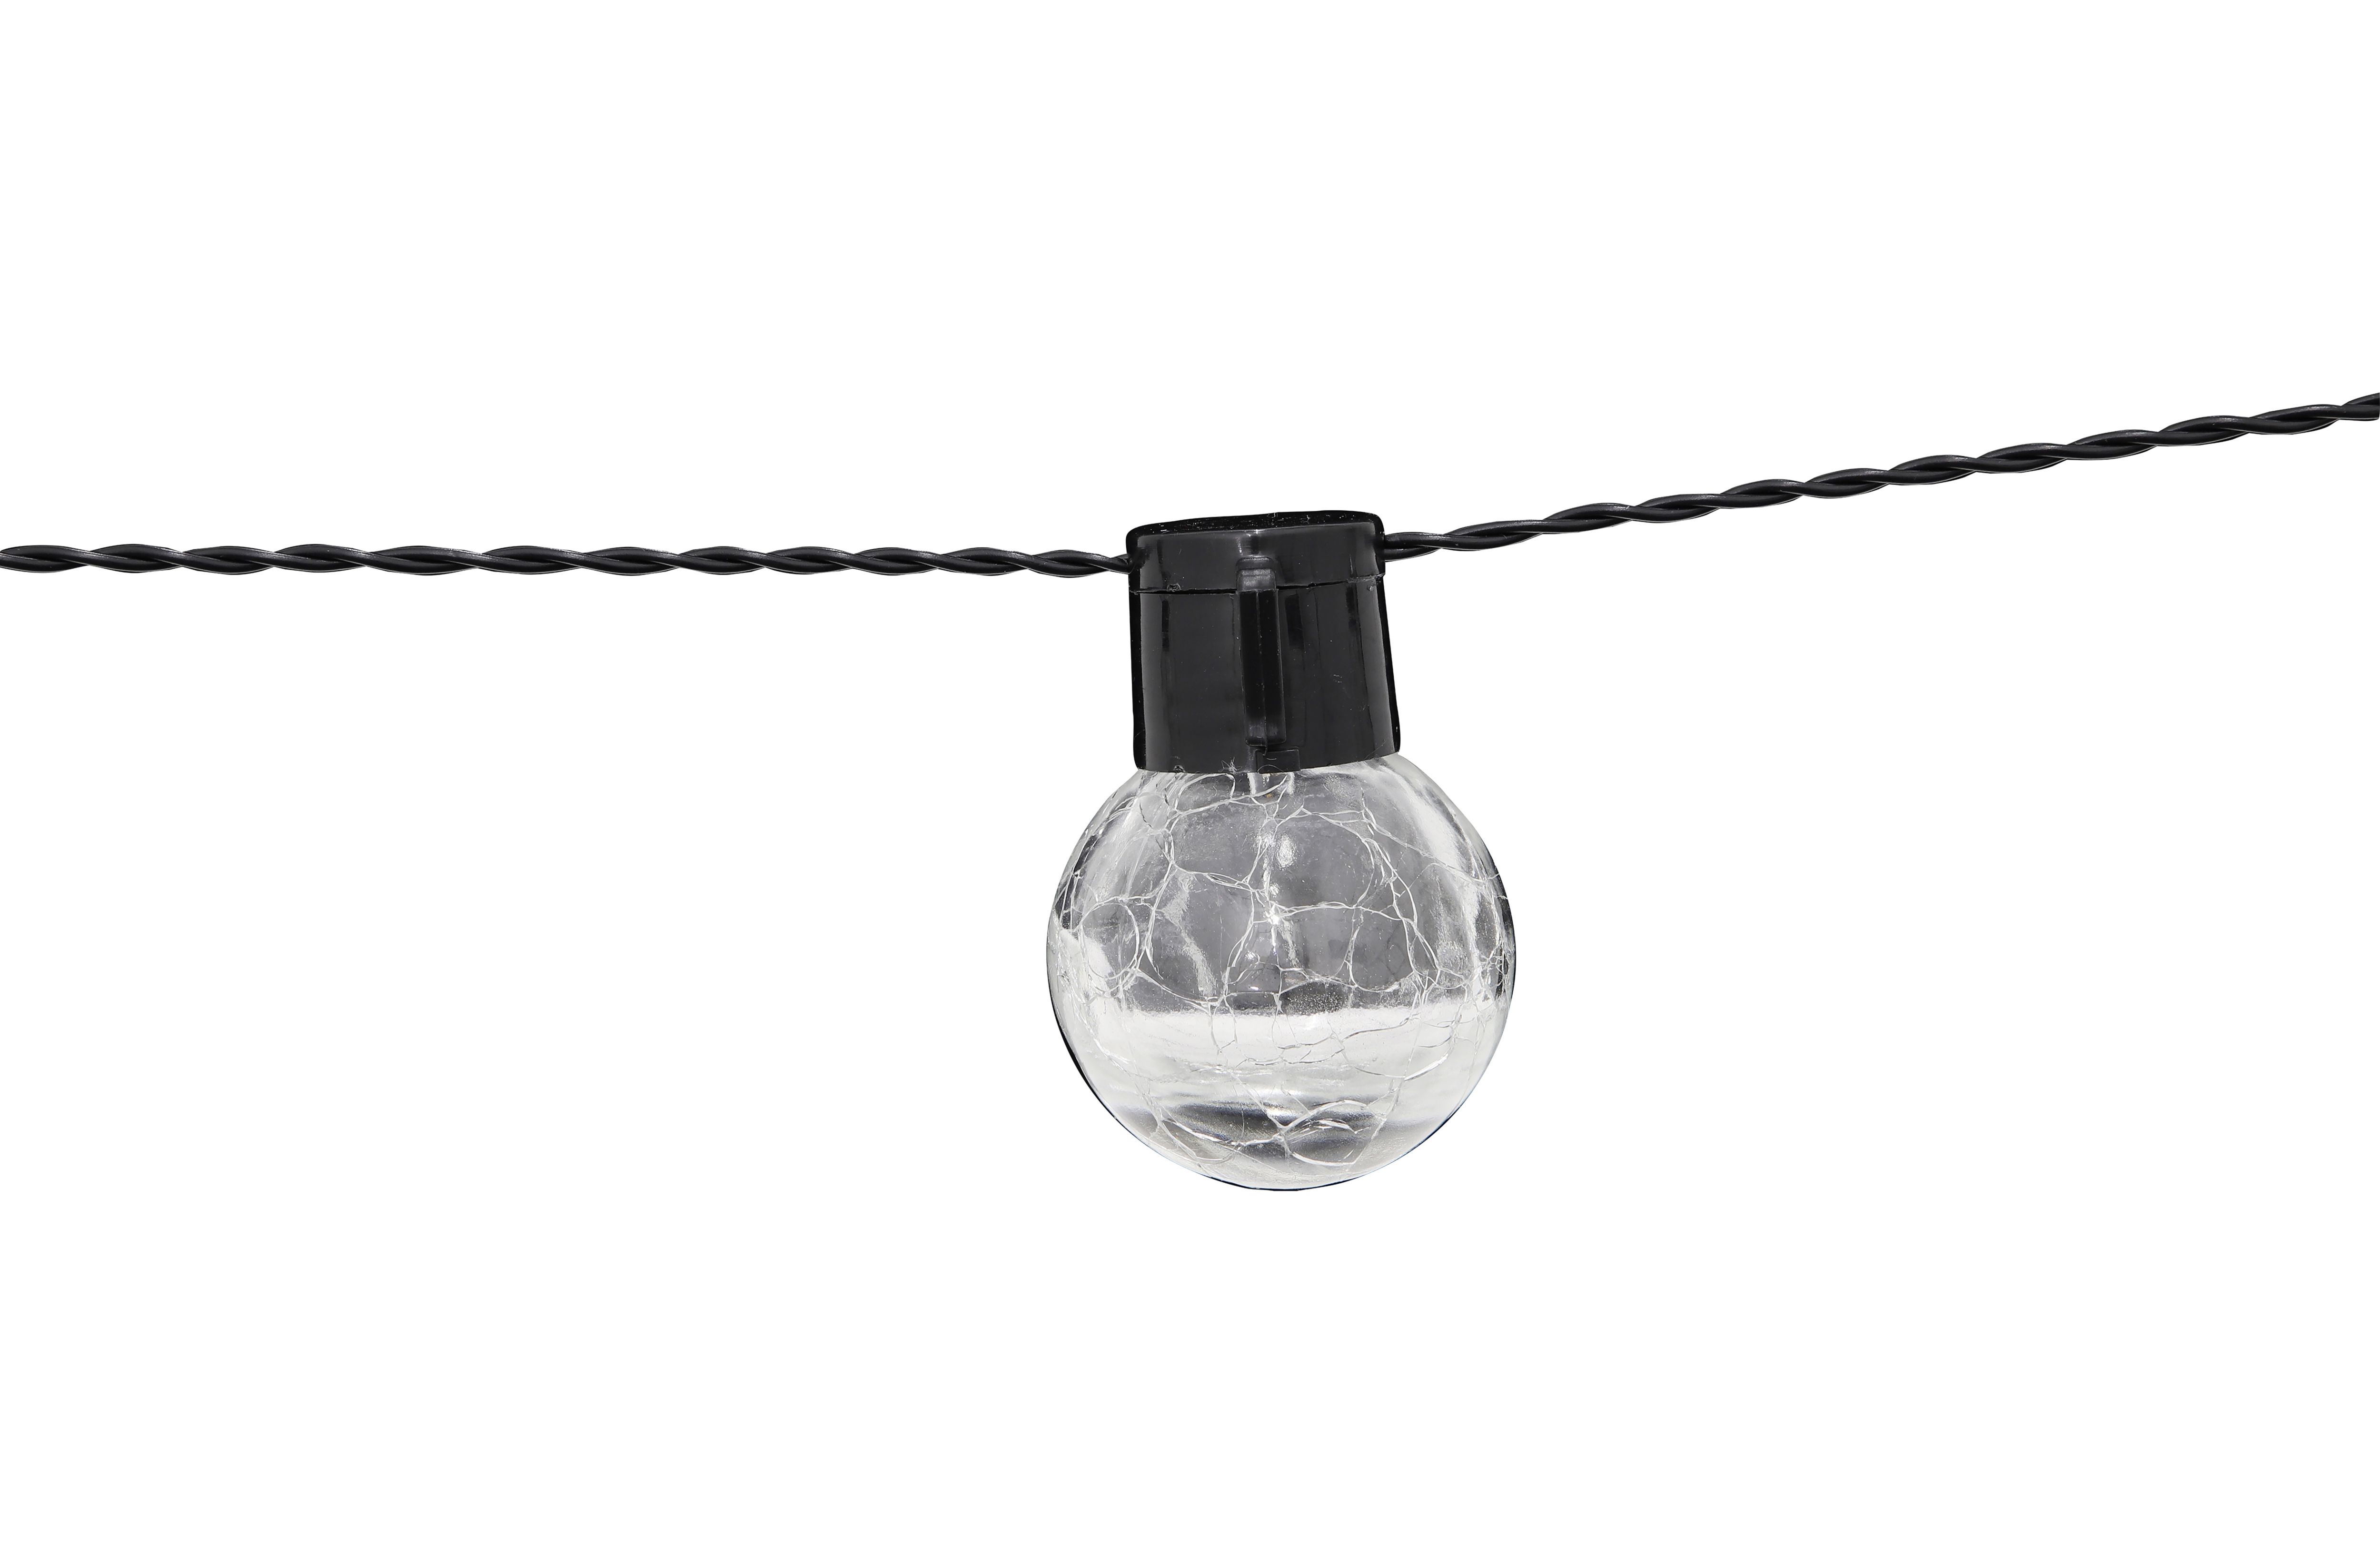 Delamere Crackle glass ball Solar-powered Warm white 8 Integrated LED Outdoor String lights